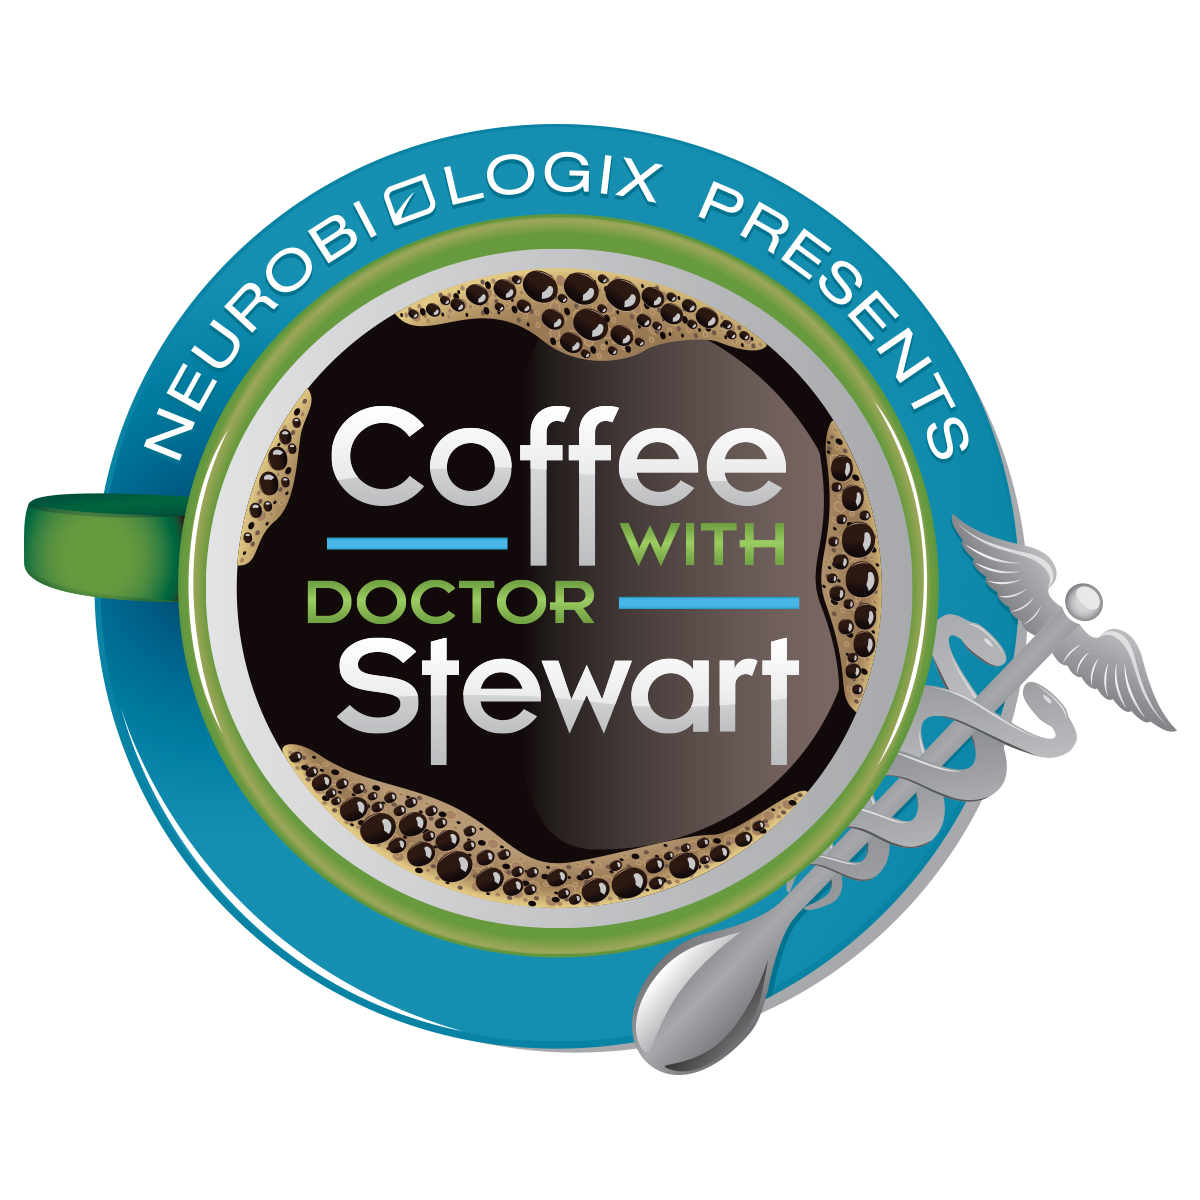 New Radio Show ”COFFEE WITH DR. STEWART” Episode 1-His Background & Expertise